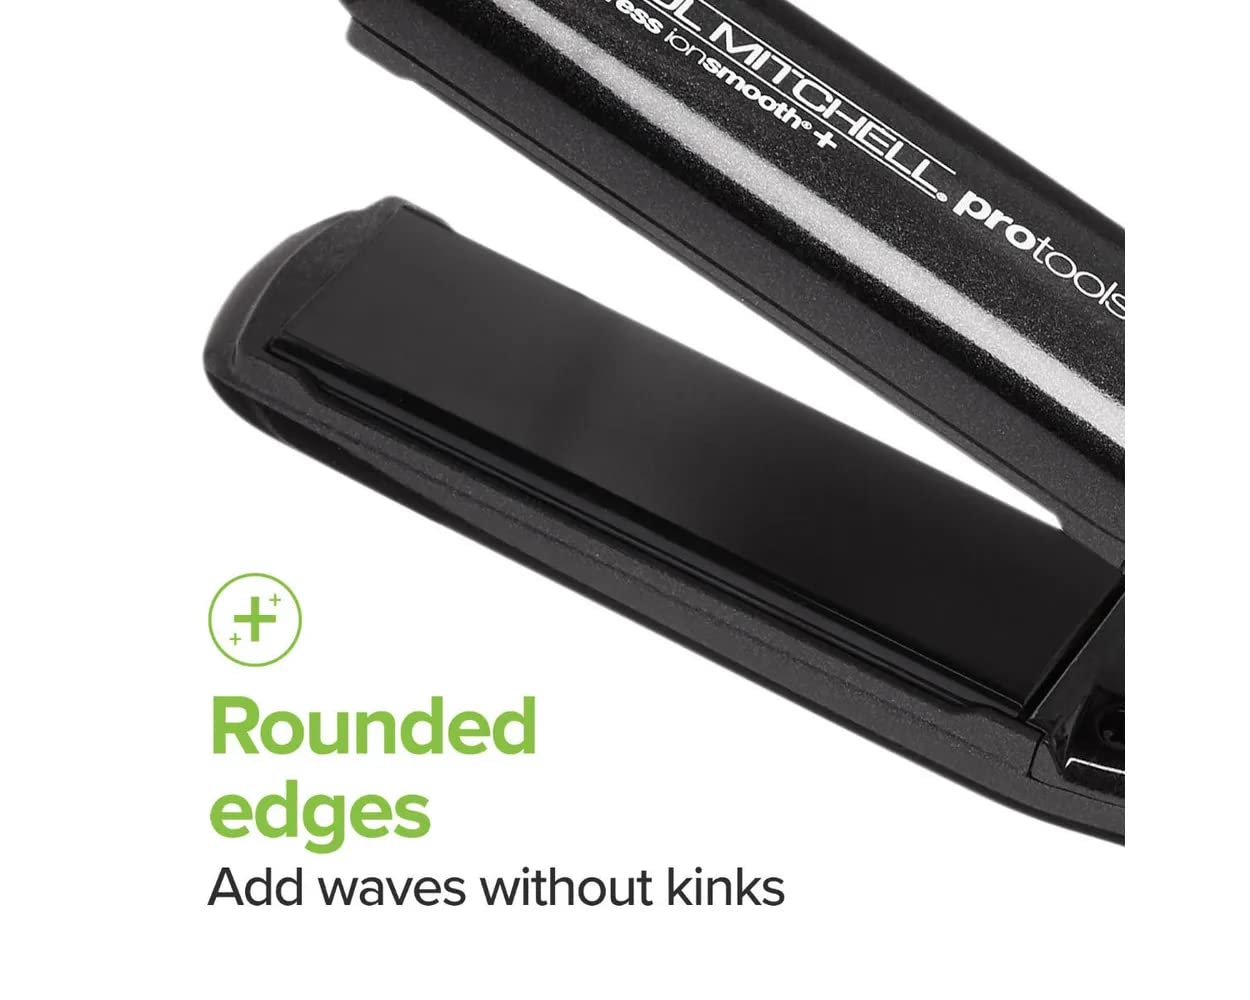 Paul Mitchell Pro Tools Express Ion Smooth+ Ceramic Flat Iron, Adjustable Heat Settings for Smoothing + Straightening